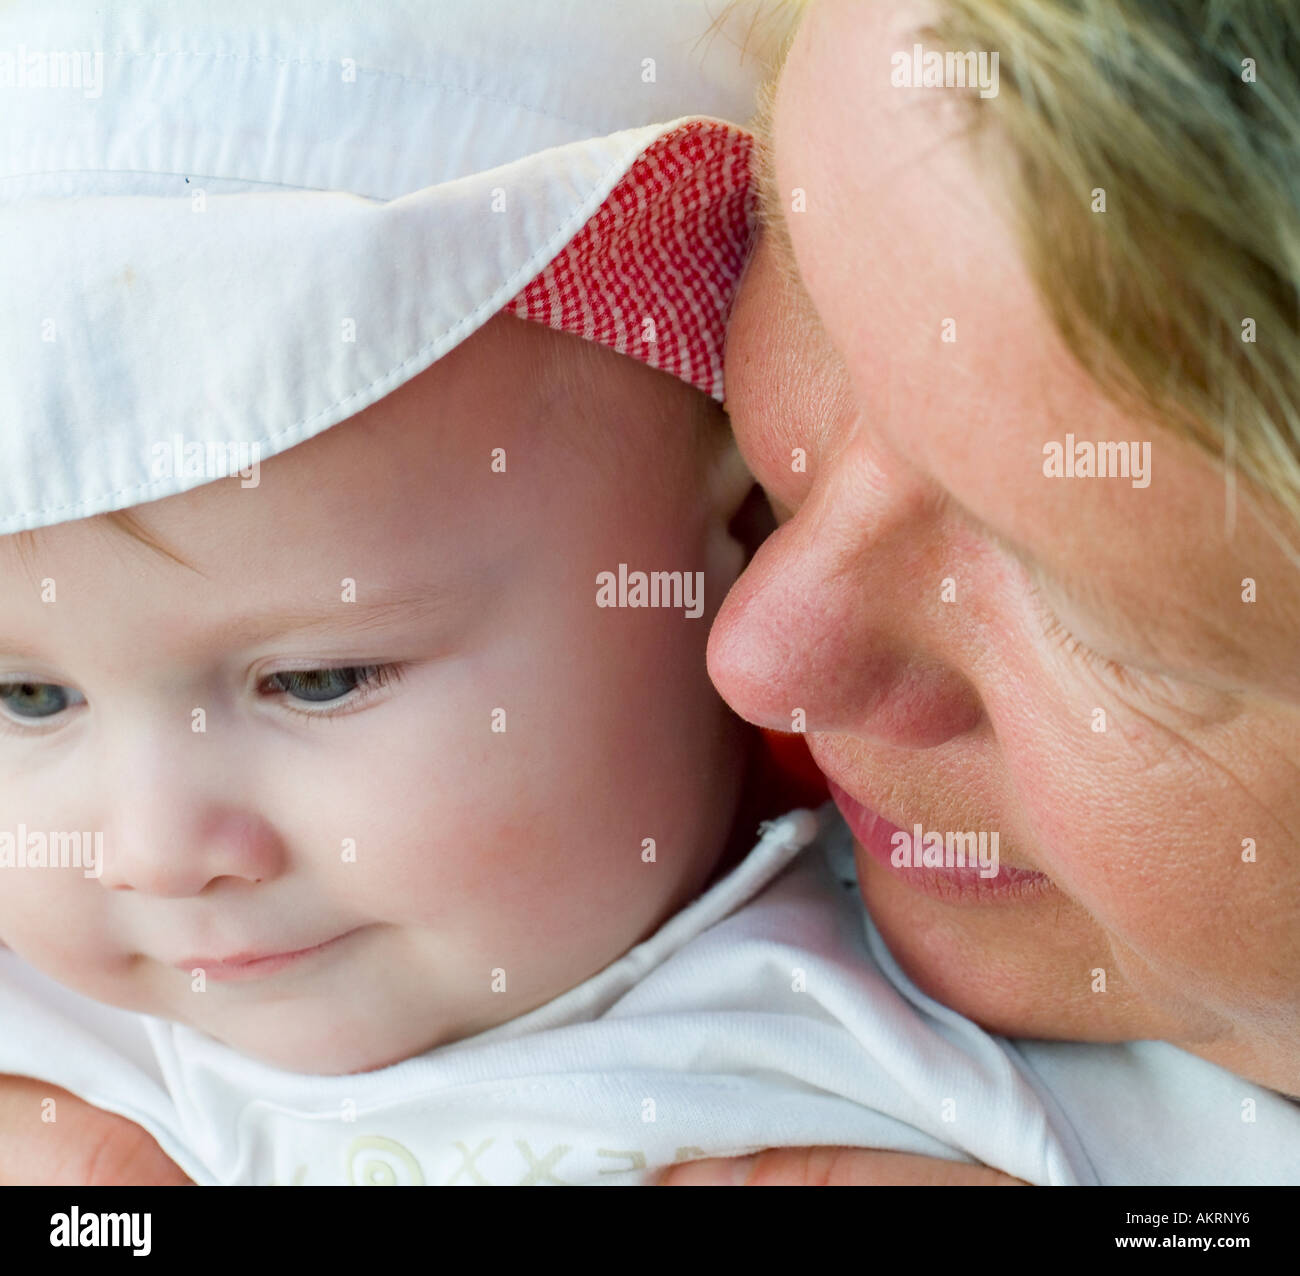 grandmother and grandchild portrait of a baby of 8 months with sun hat and a woman in age of about 45 to 55 years Stock Photo